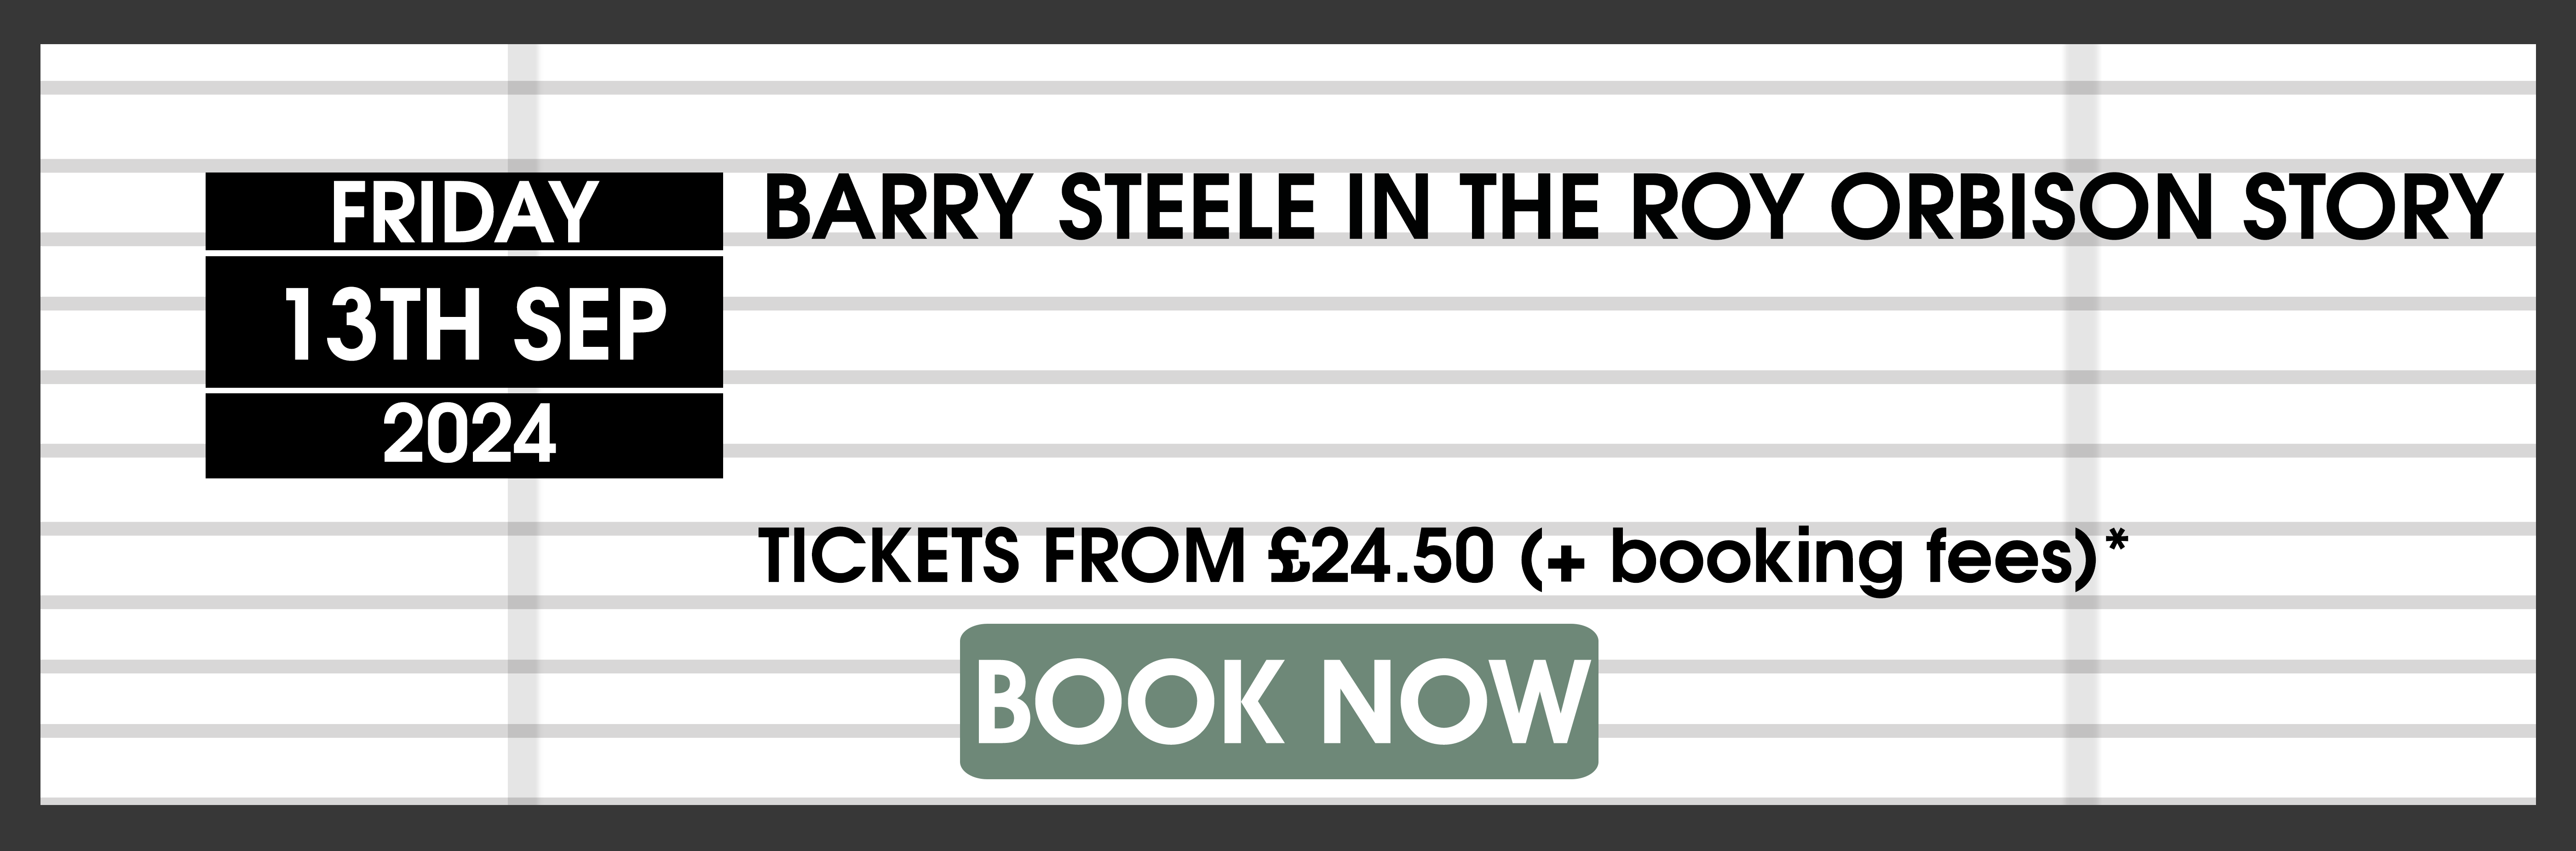 23.06.30 Barry Steele book now